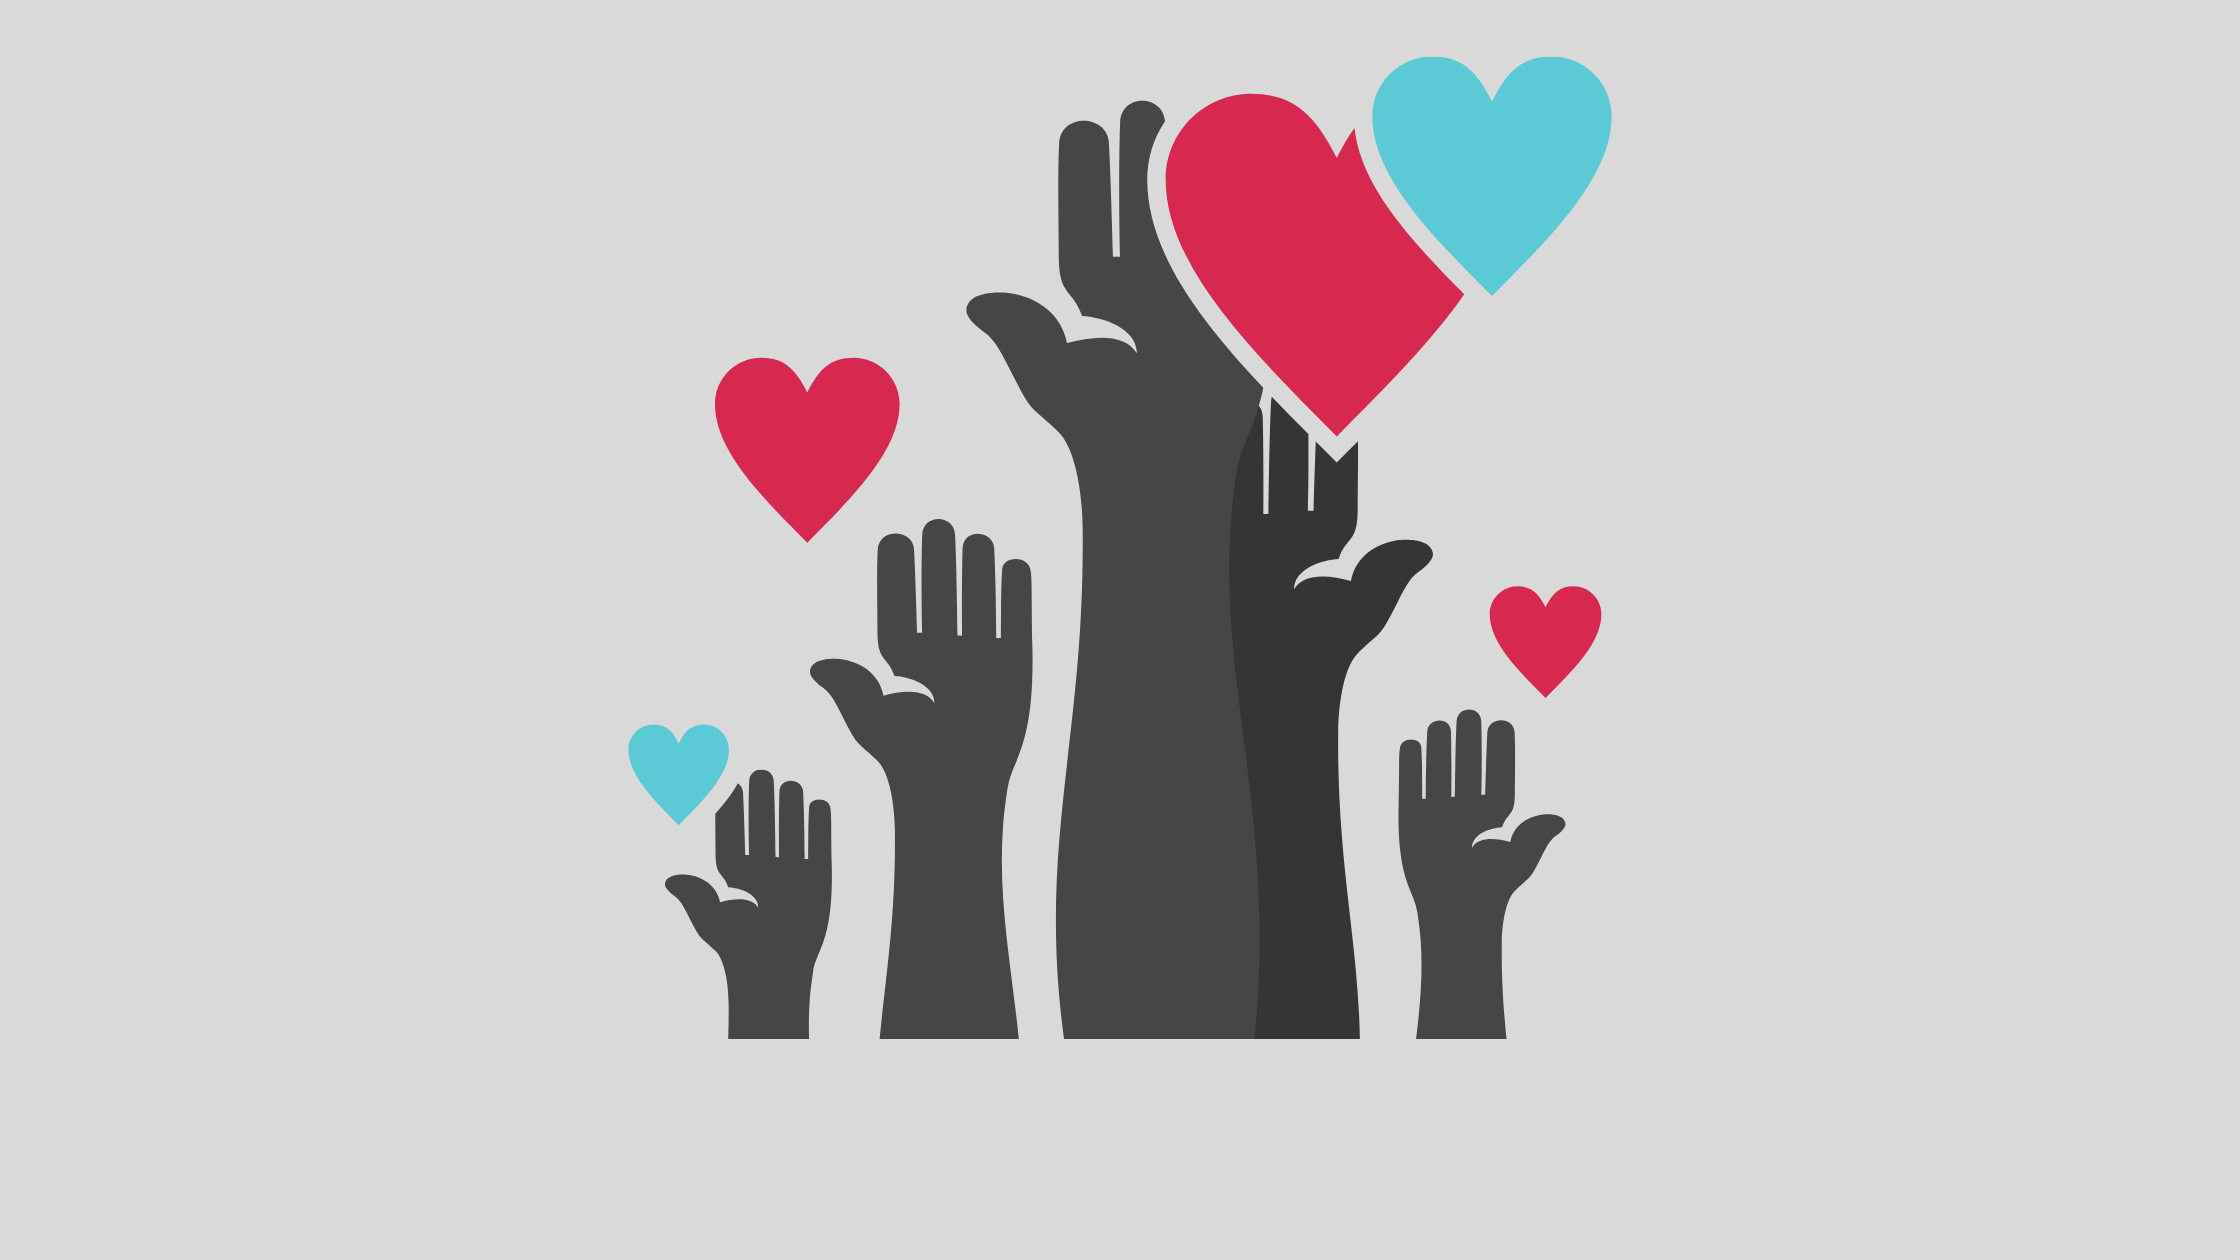 several hands reaching up with hearts